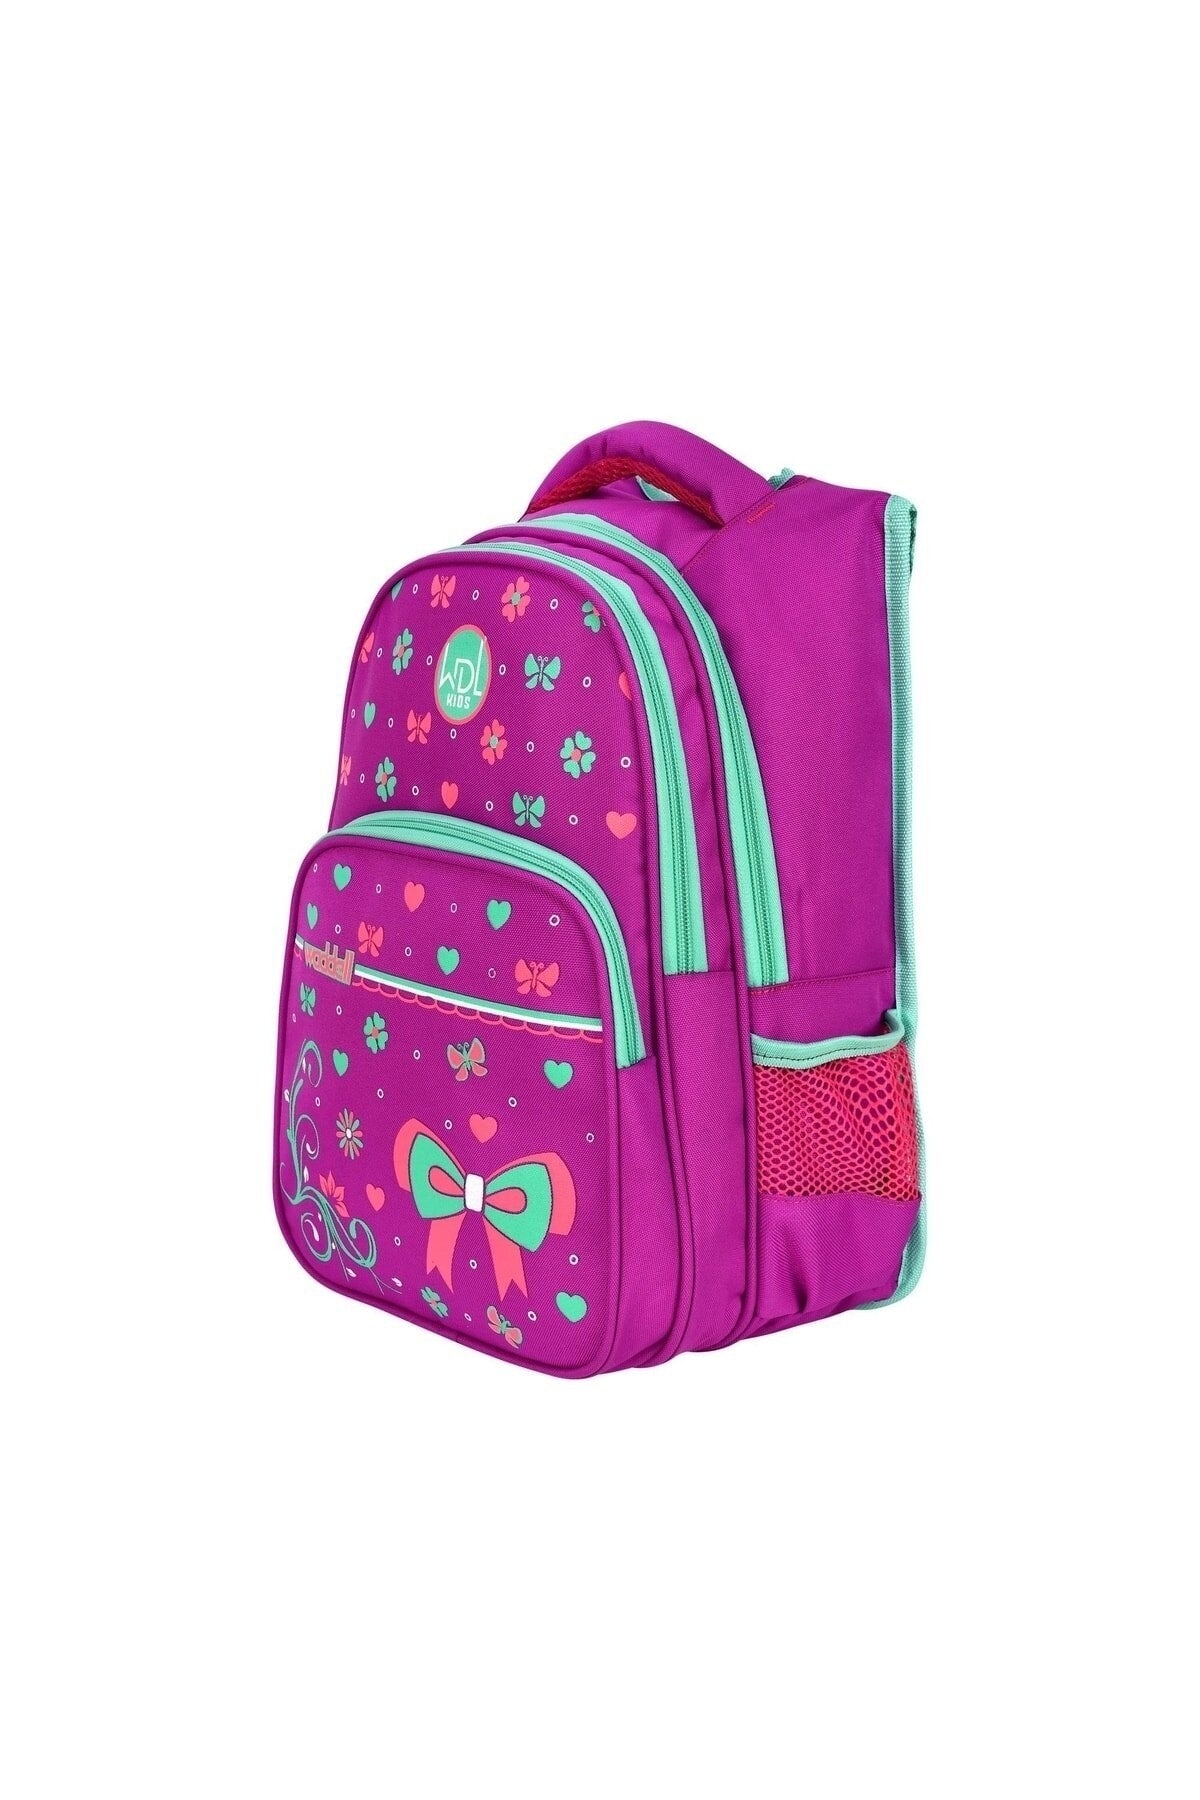 Licensed Frequency Fuchsia Bowtie Patterned Primary School Backpack